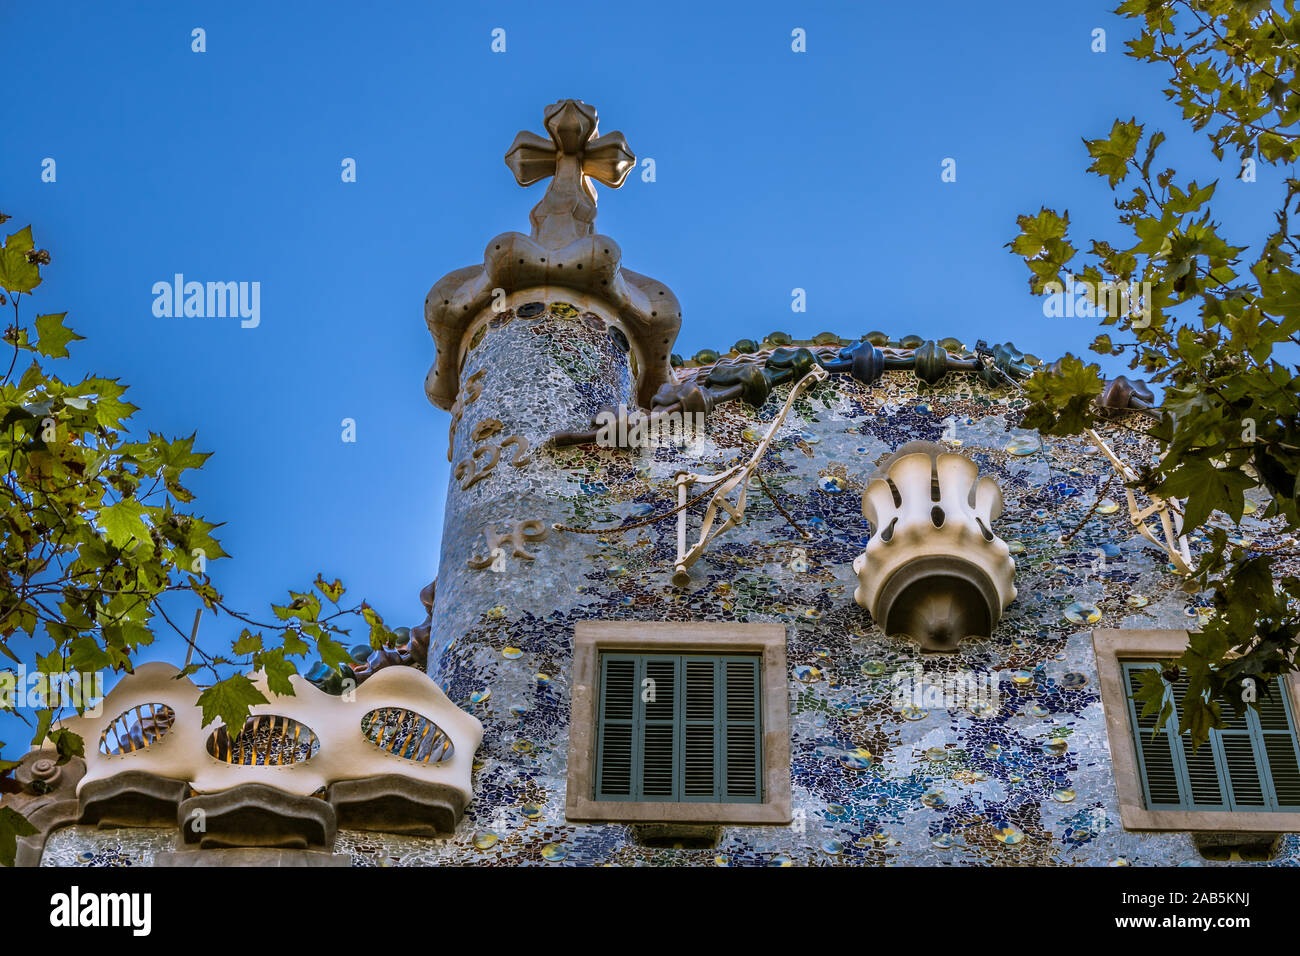 BARCELONA, SPAIN - AUGUST 24, 2019: Casa Batlló is a work designed by the famous Catalan architect Antoni Gaudi in 1904 and completed in 1907. Stock Photo